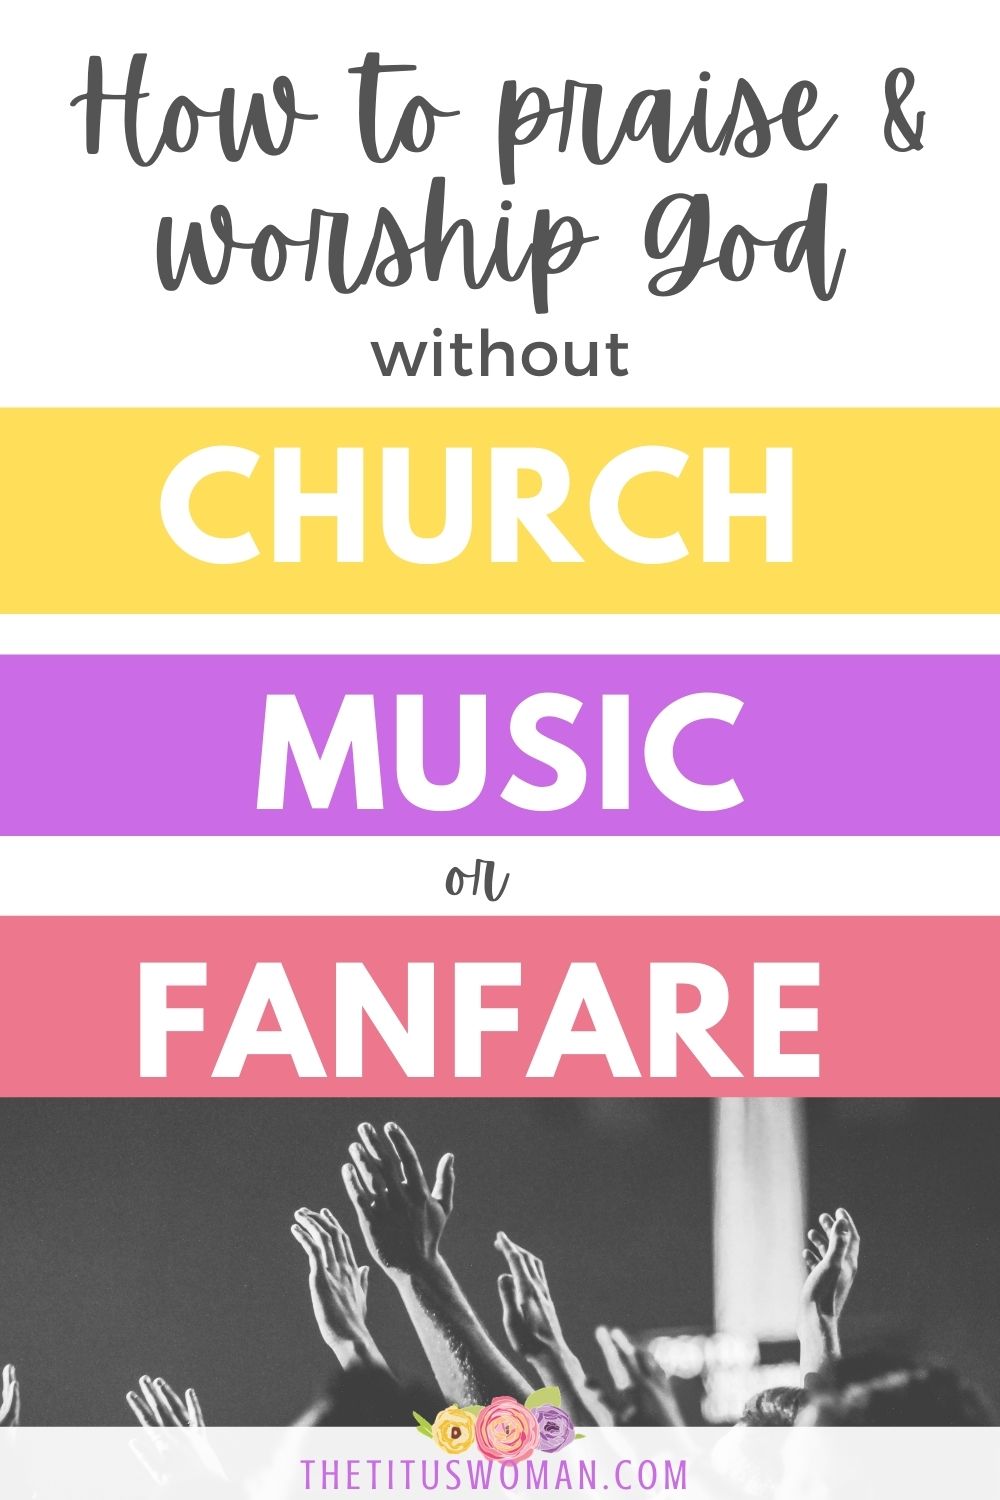 you can praise and worship God without church, music or fanfare